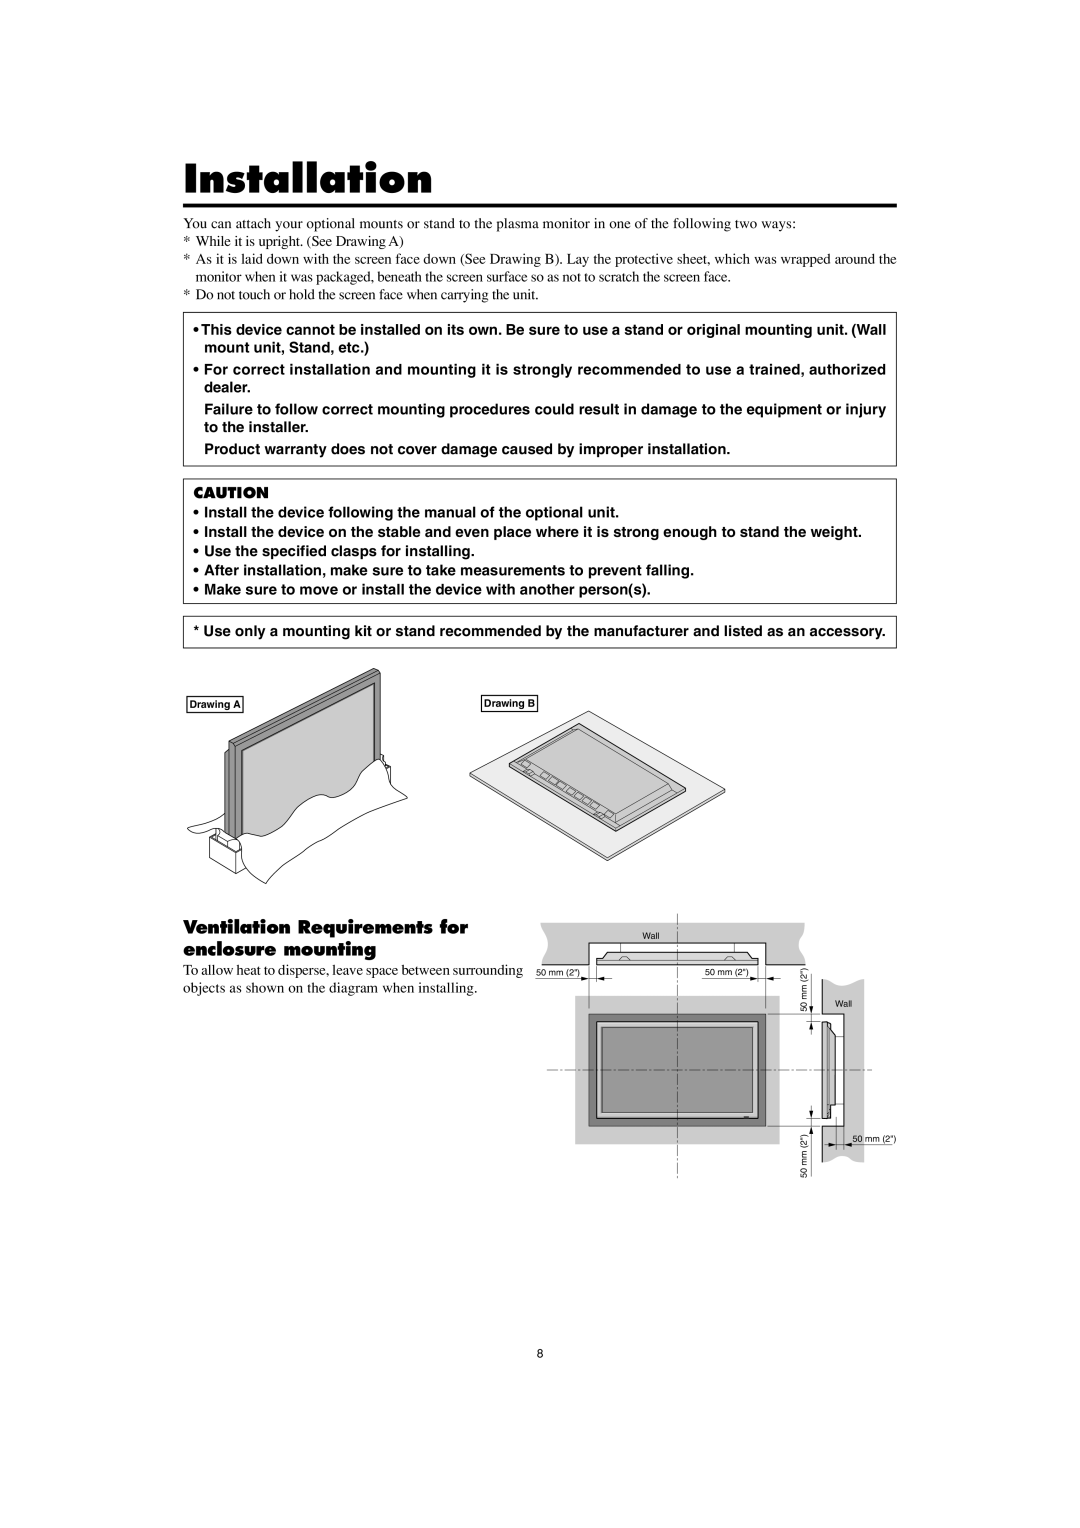 Marantz PD5001 Installation, Ventilation Requirements for enclosure mounting, Use the specified clasps for installing 